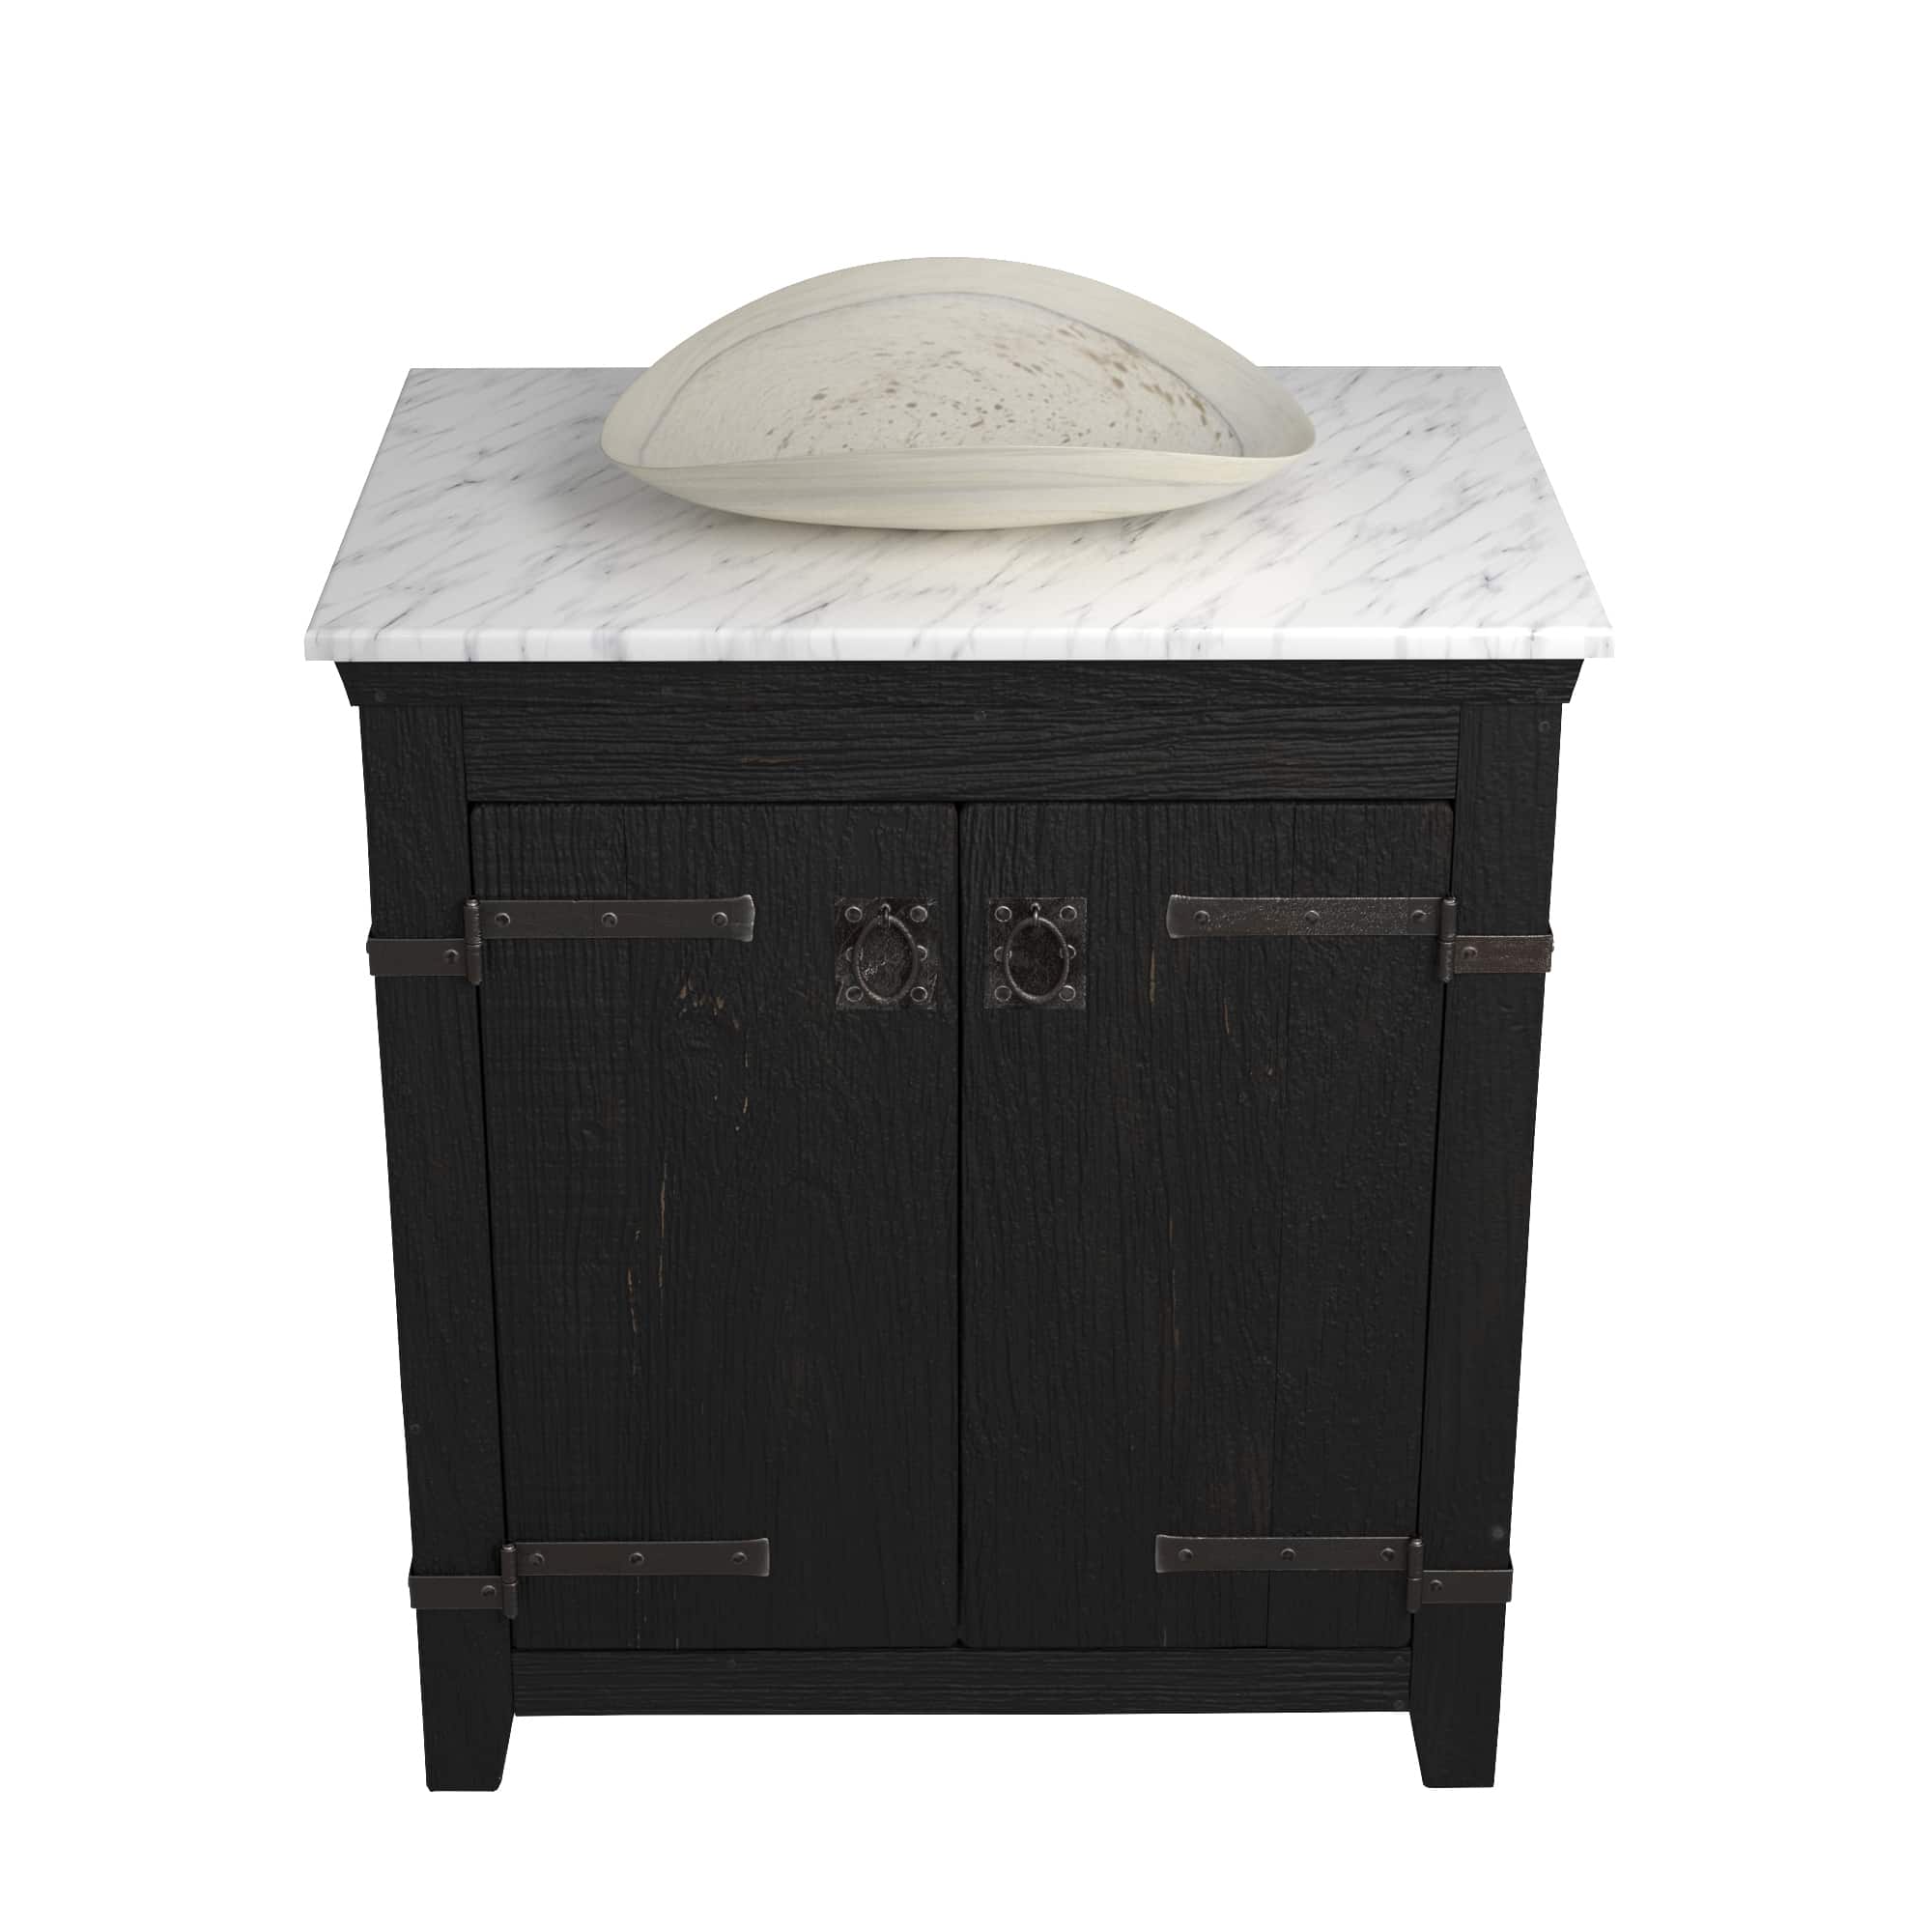 Native Trails 30" Americana Vanity in Anvil with Carrara Marble Top and Sorrento in Beachcomber, Single Faucet Hole, BND30-VB-CT-MG-109